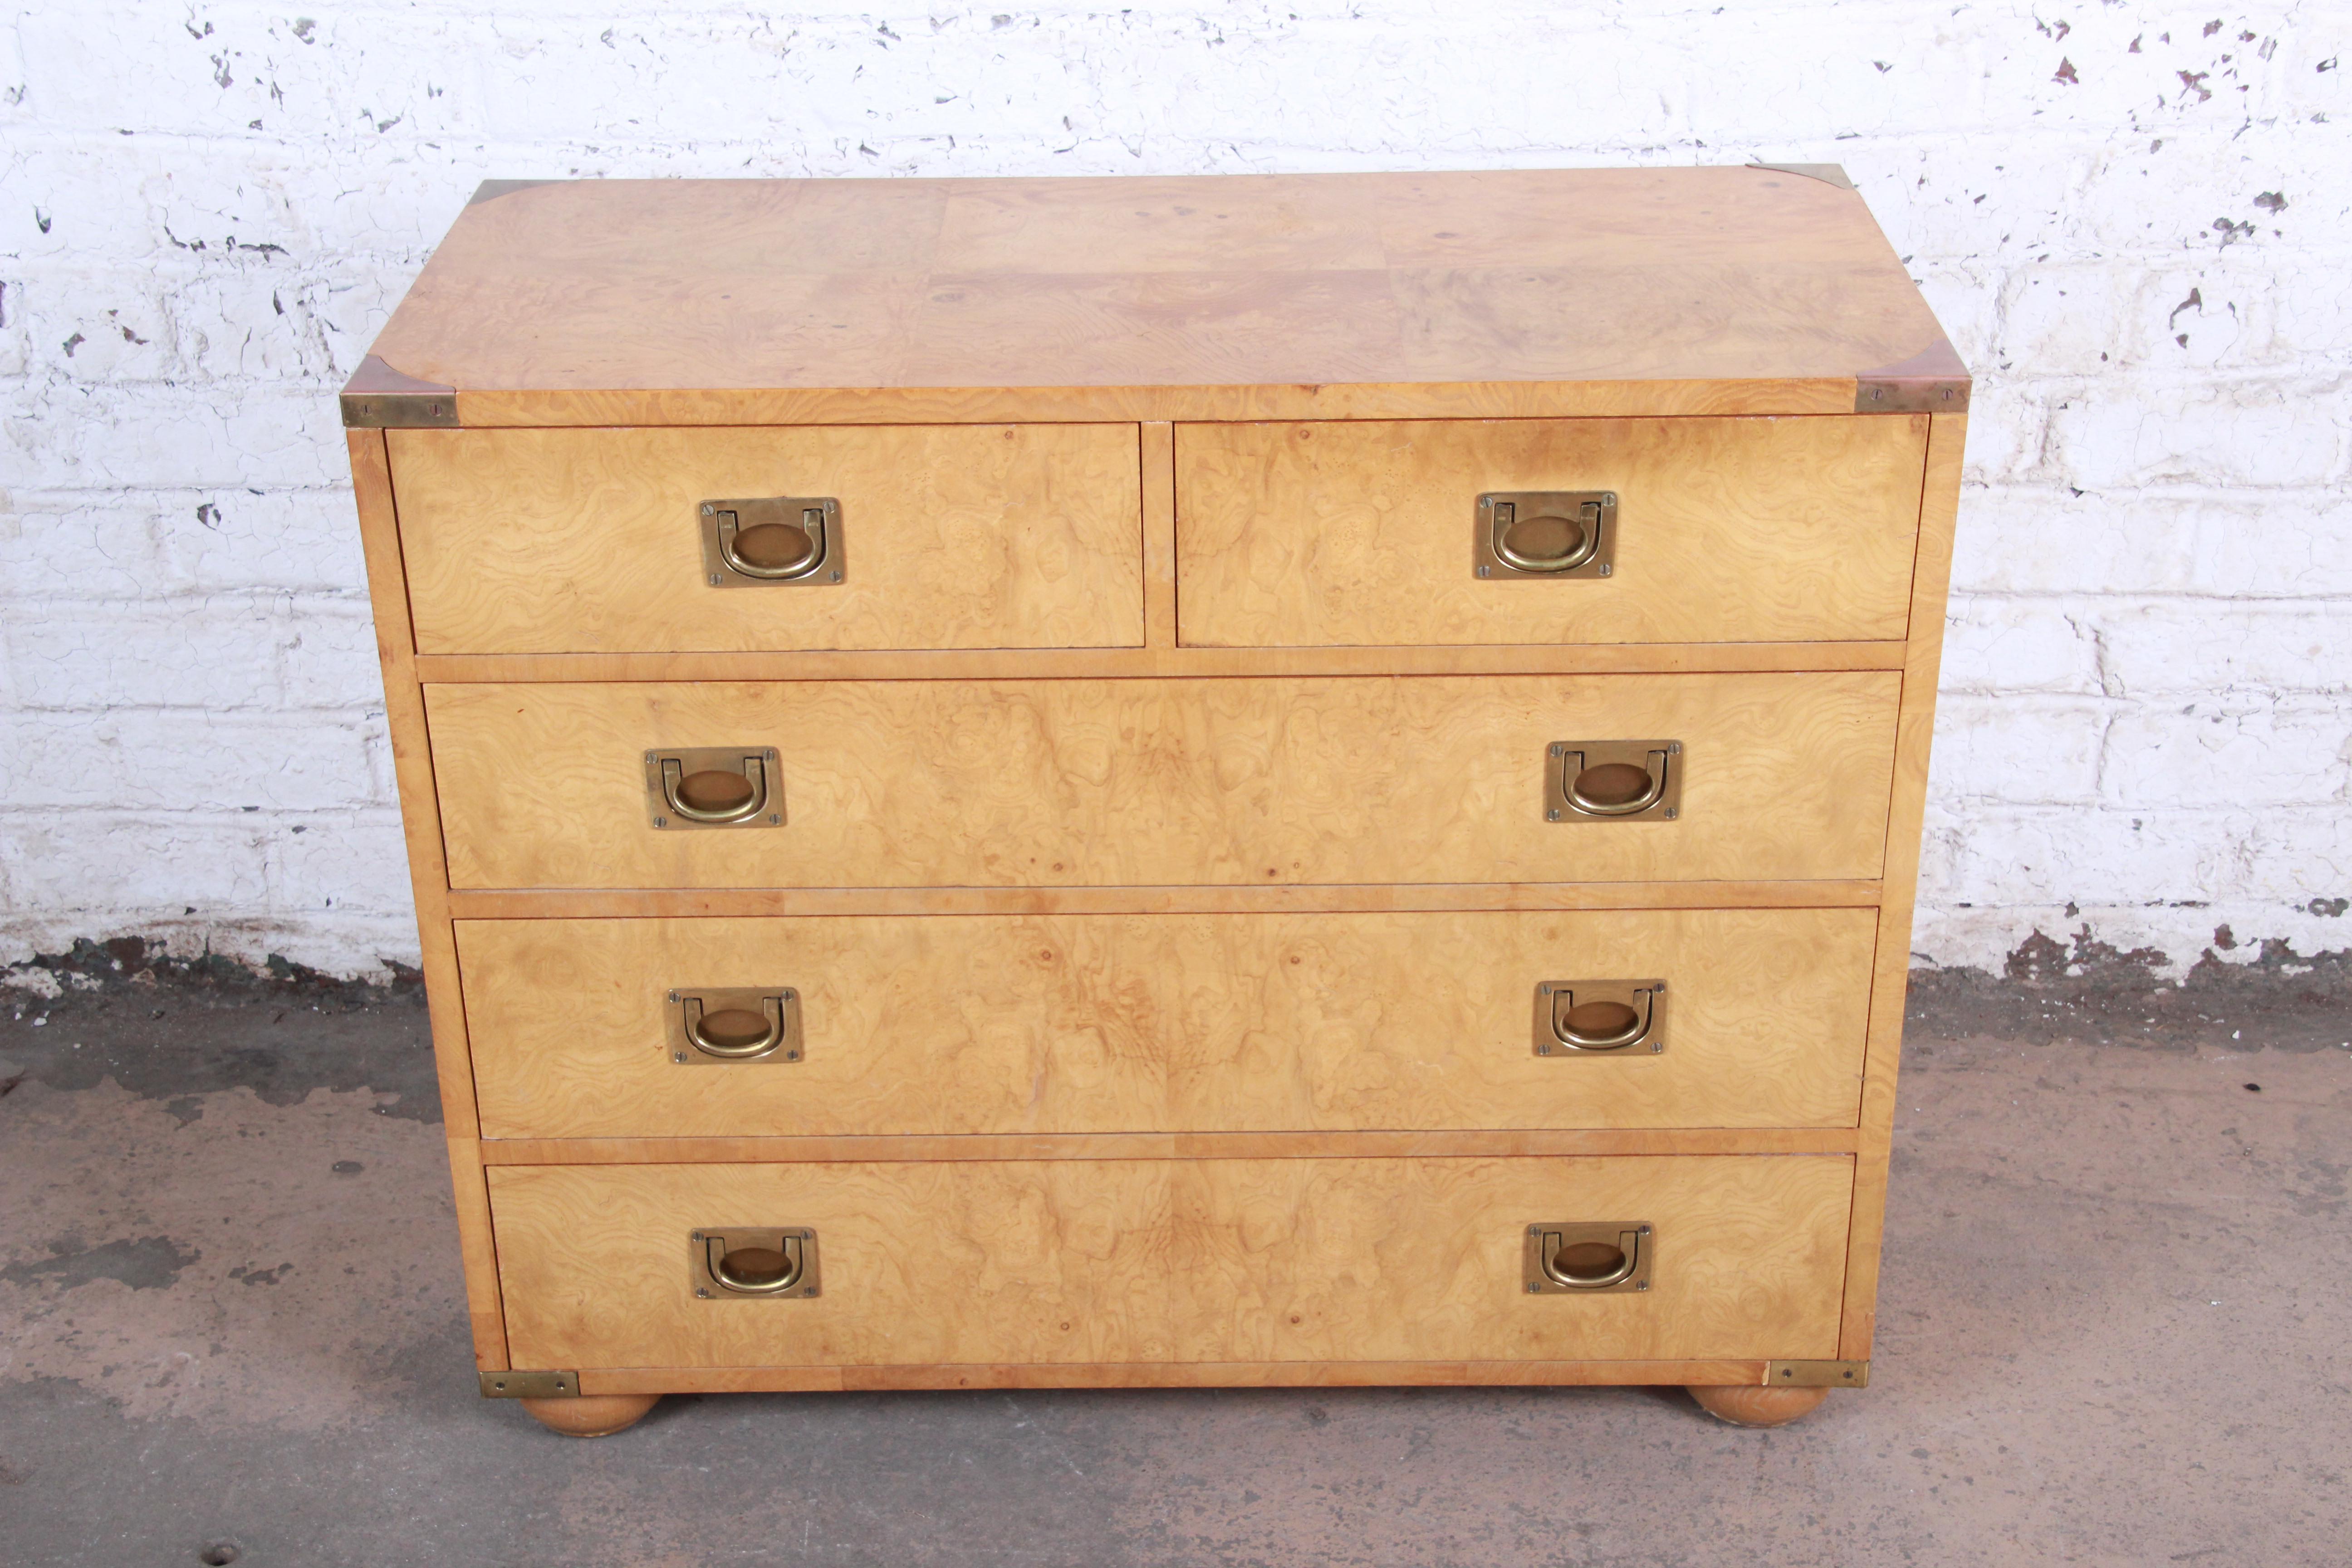 An exceptional Hollywood Regency Campaign style chest of drawers by Henredon. The dresser features stunning burl wood grain, with original brass hardware and accents. It offers ample storage, with five deep dovetailed drawers. The original label is